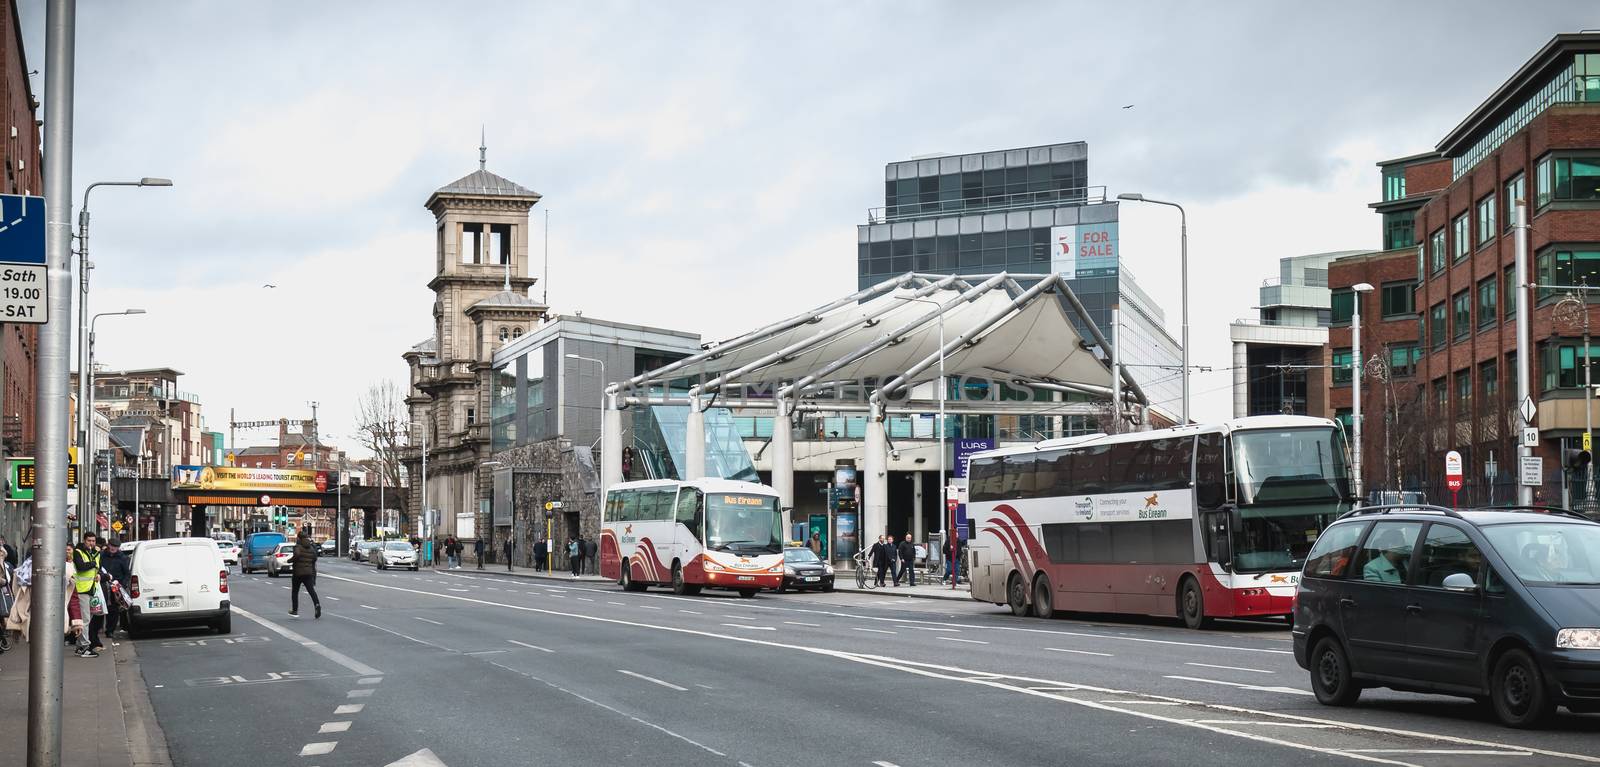 Street atmosphere and architecture before the DART Connolly trai by AtlanticEUROSTOXX